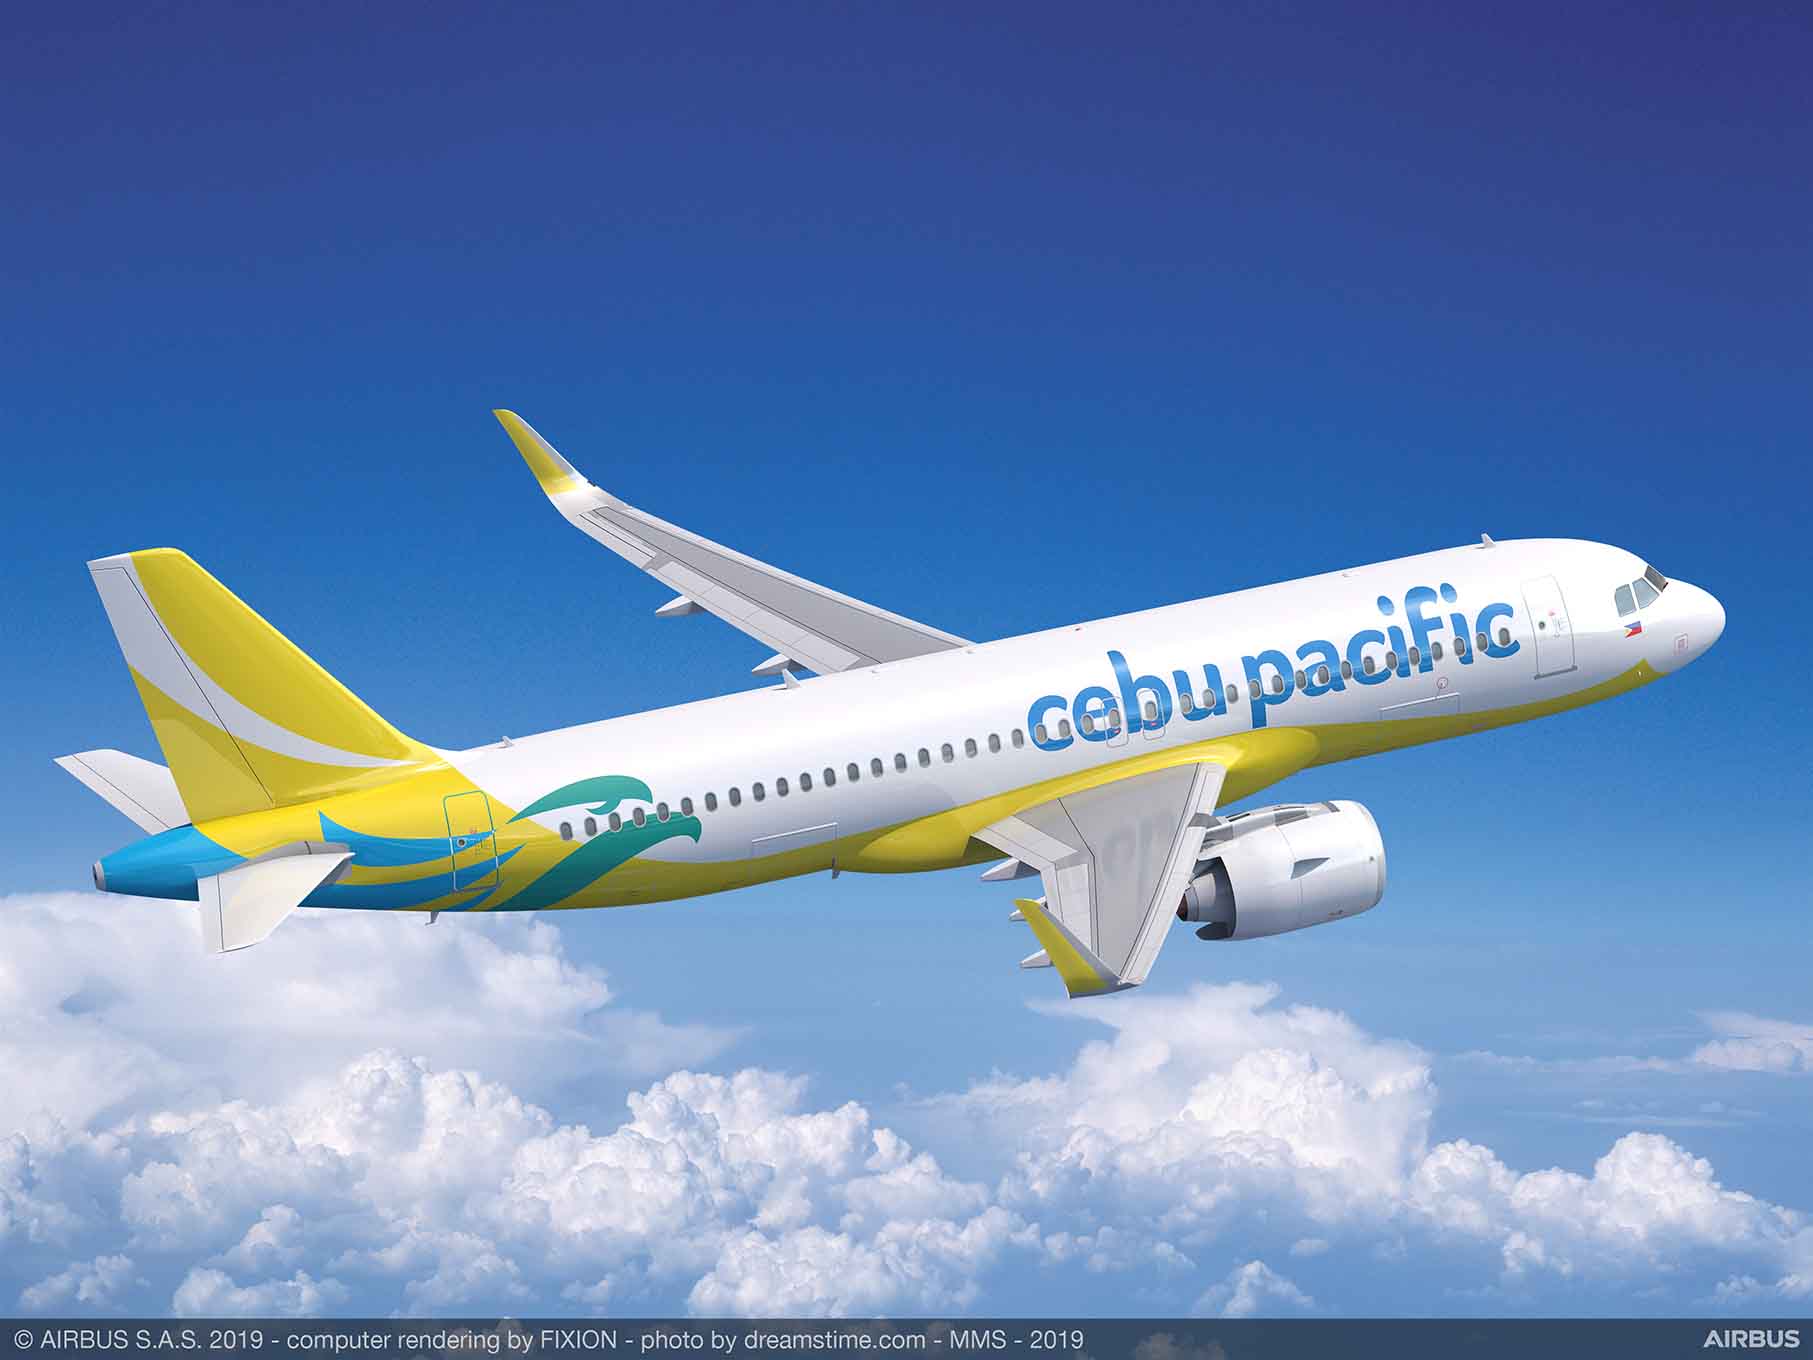 Cebu Pacific Air adds A321s to AFI KLM E&M components contract